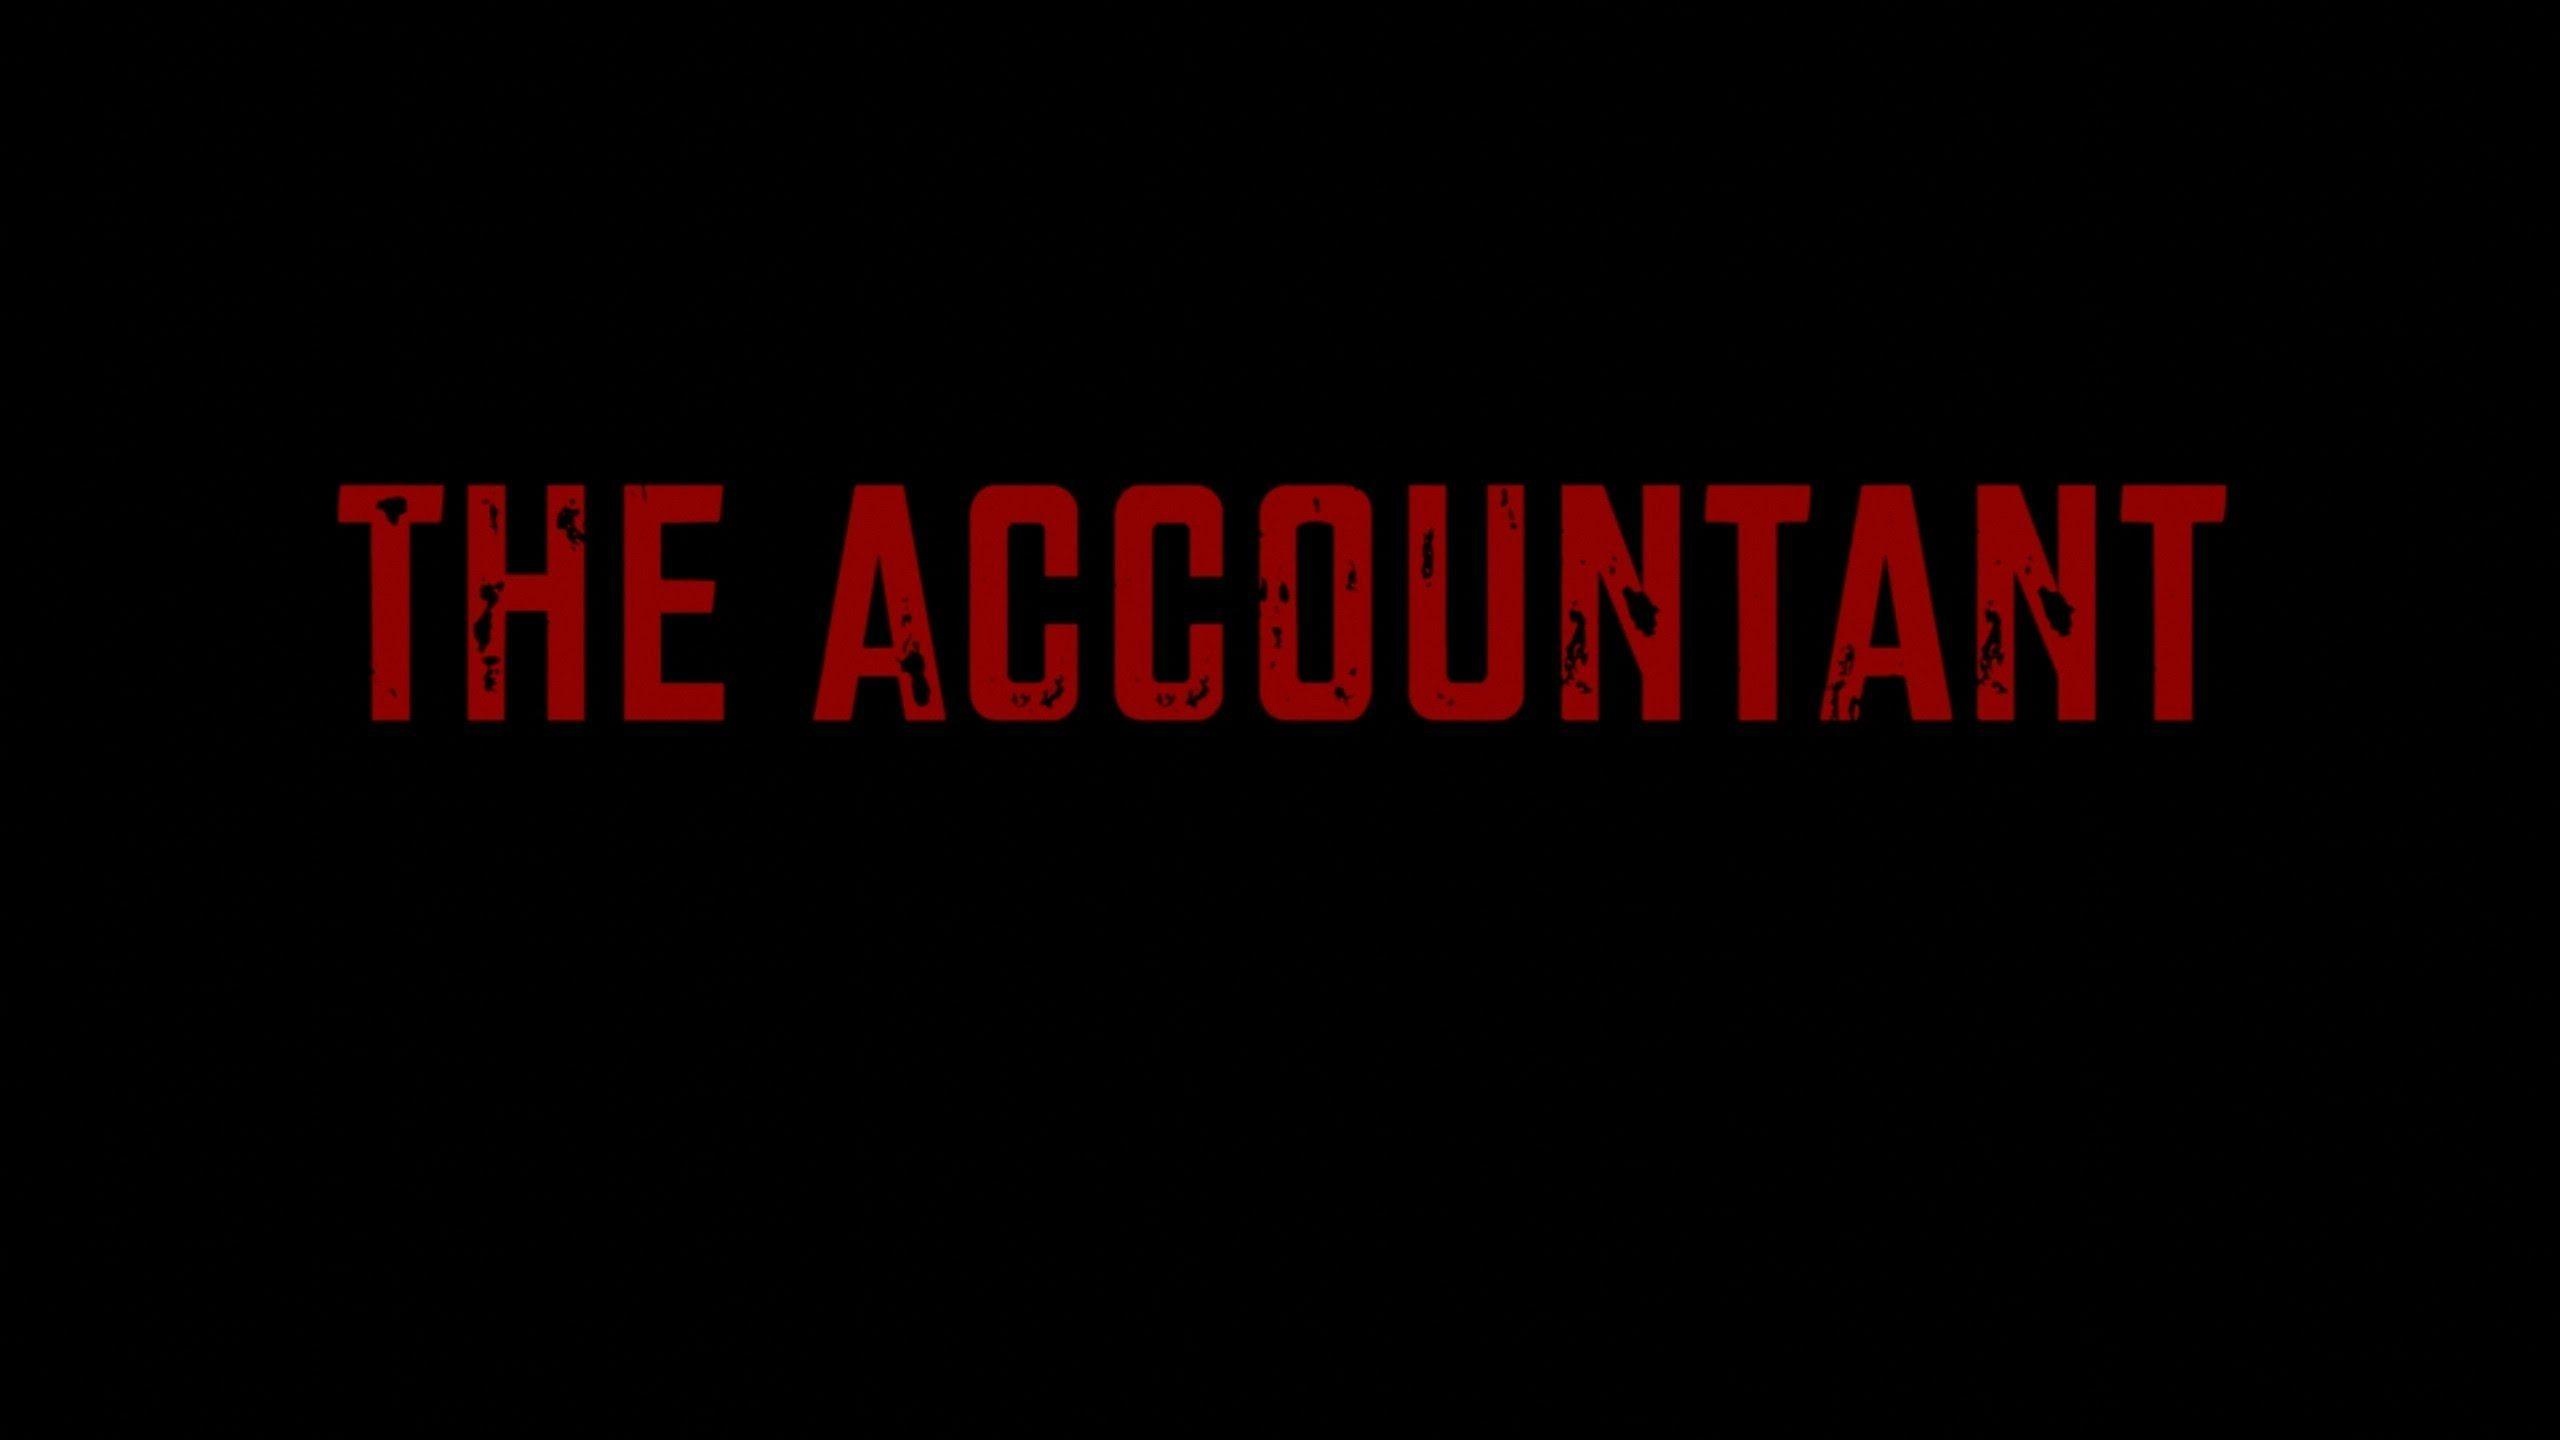 The Accountant Movie, Cool Accounting Wallpaper, 2560x1440 HD Desktop